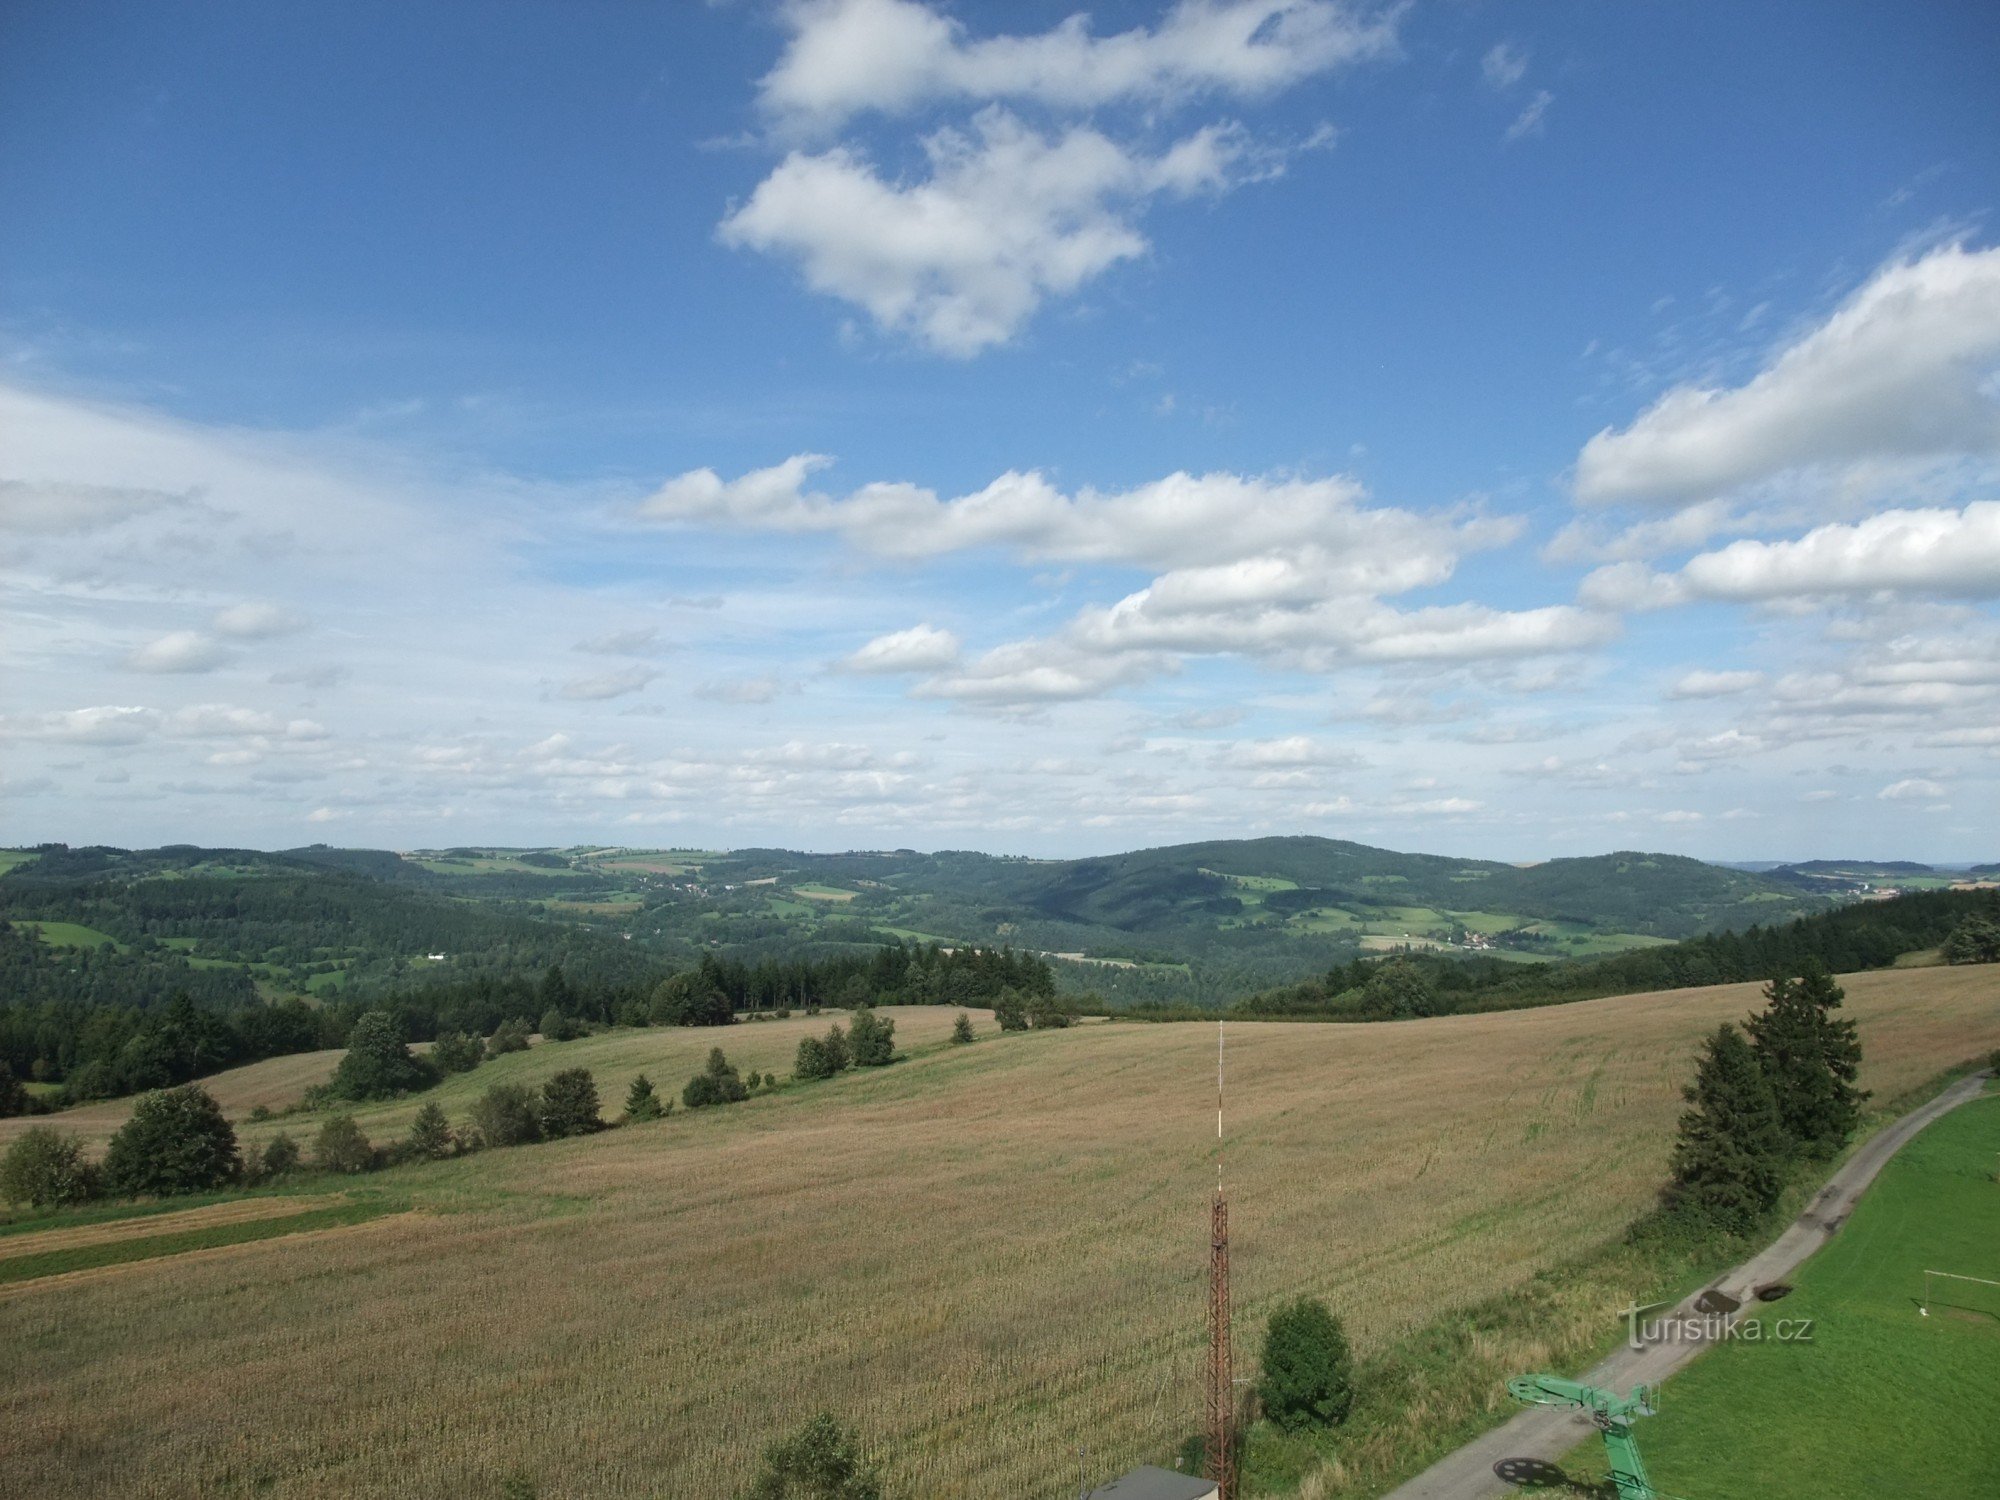 View of the Bohemian-Moravian Highlands